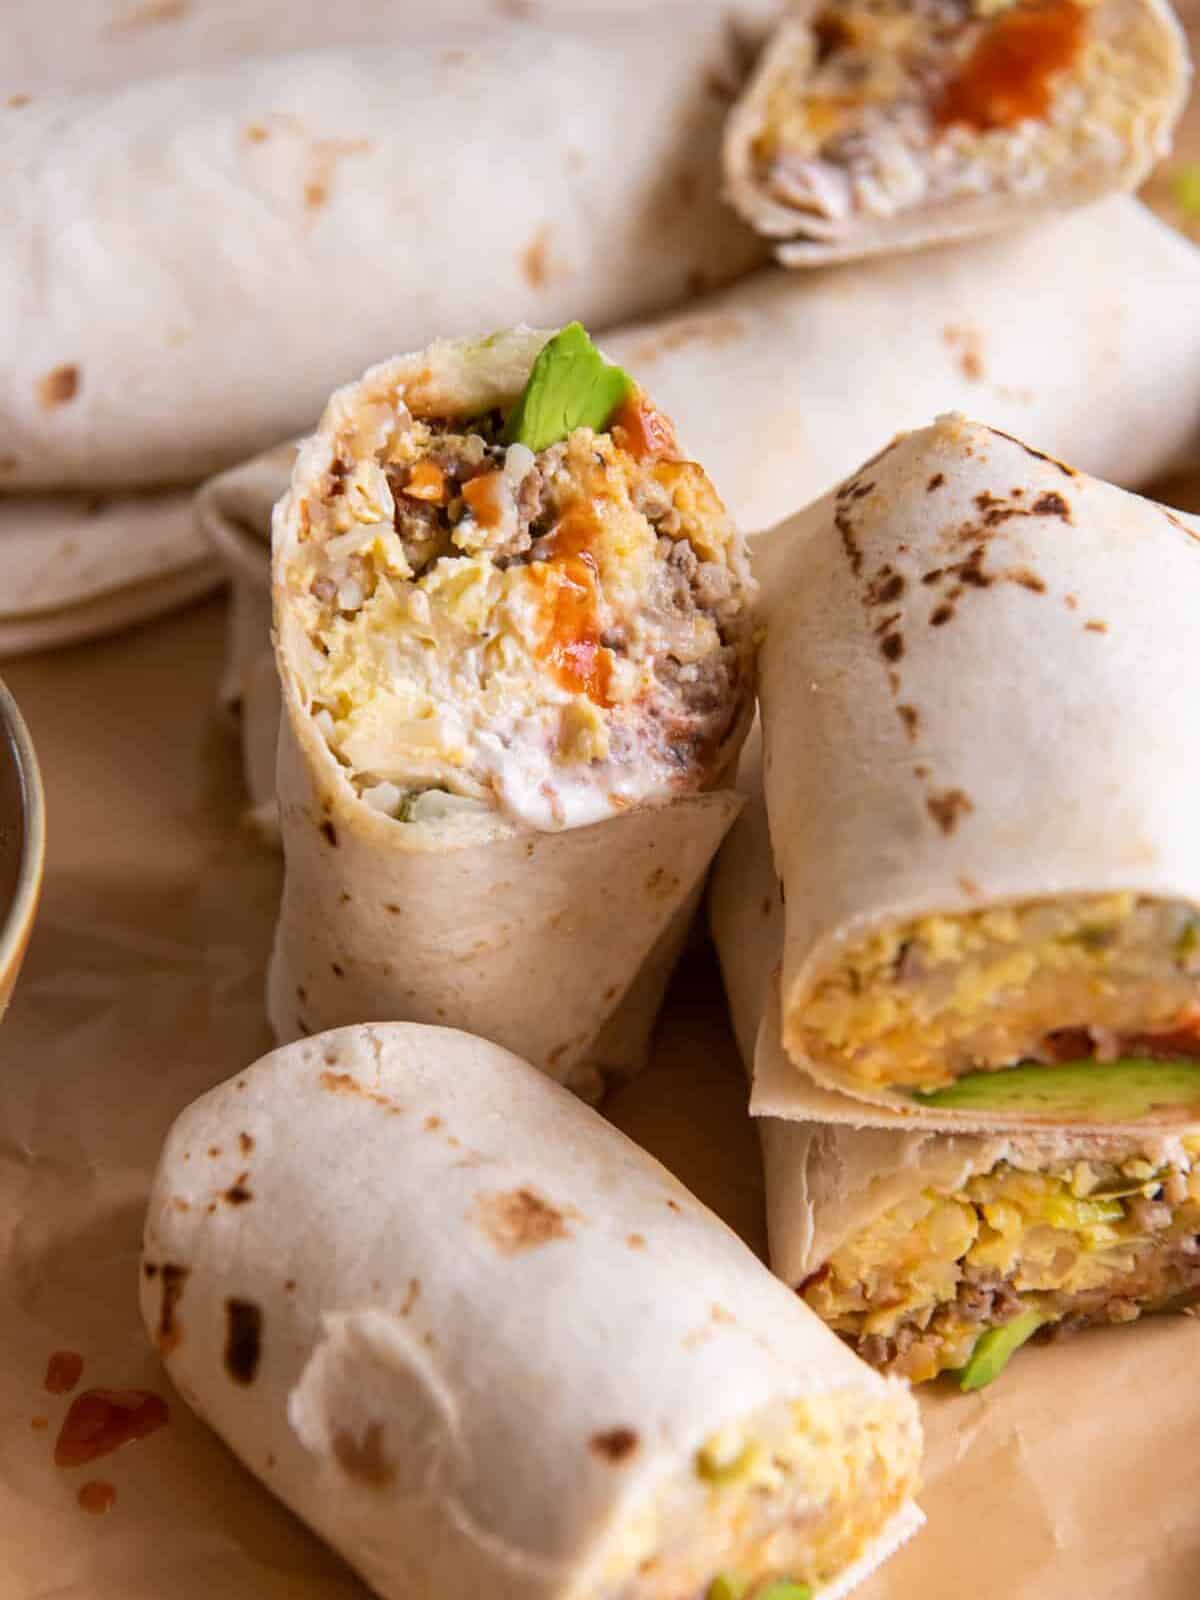 a pile of crockpot breakfast burritos cut in half to reveal the egg and sausage filling